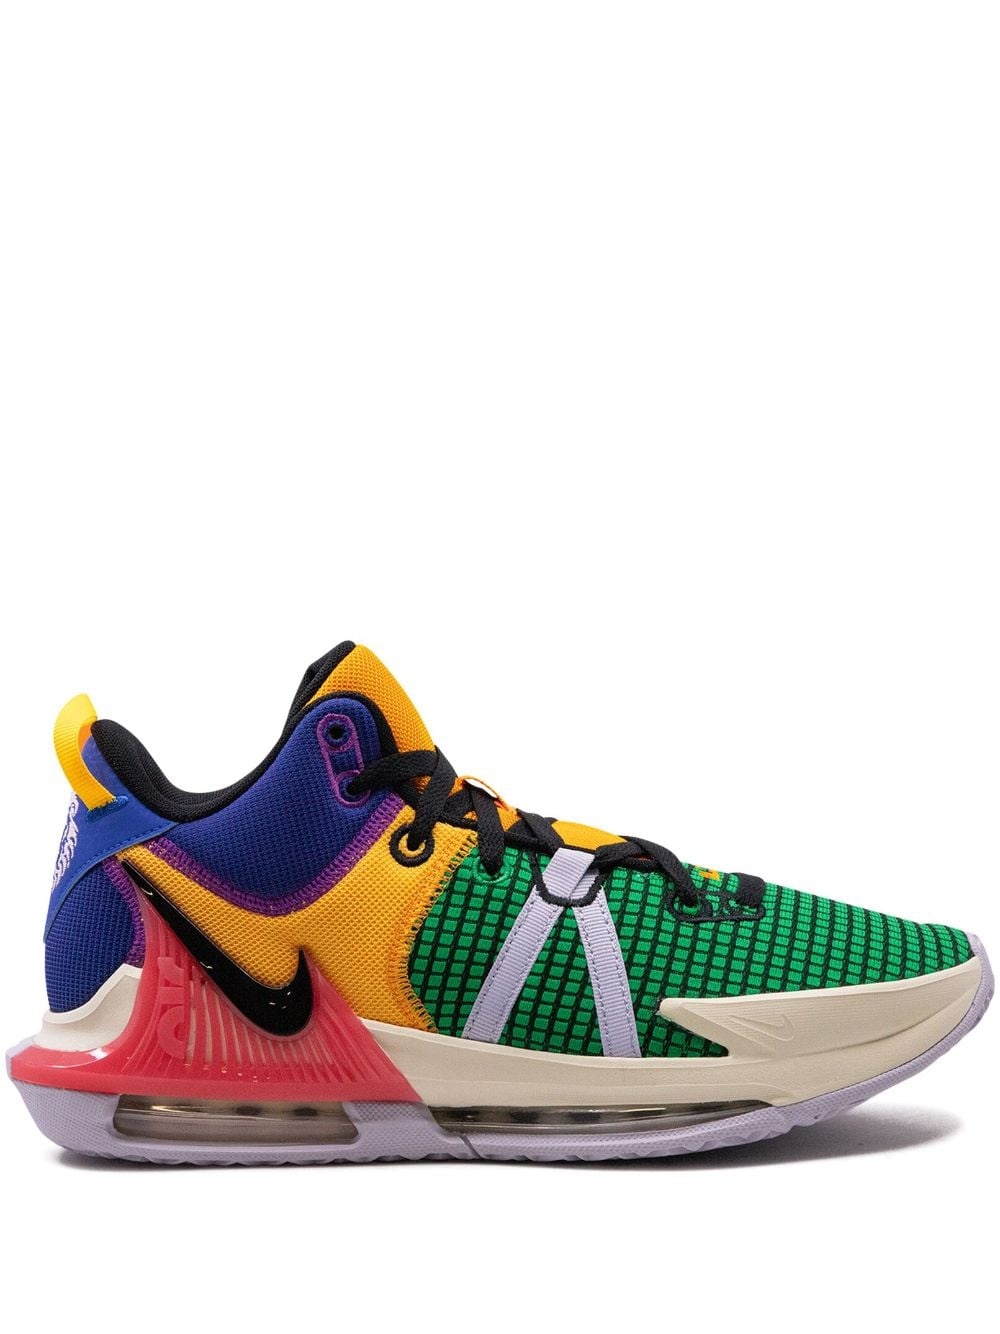 LeBron Witness 7 "Multi Color" sneakers - 1